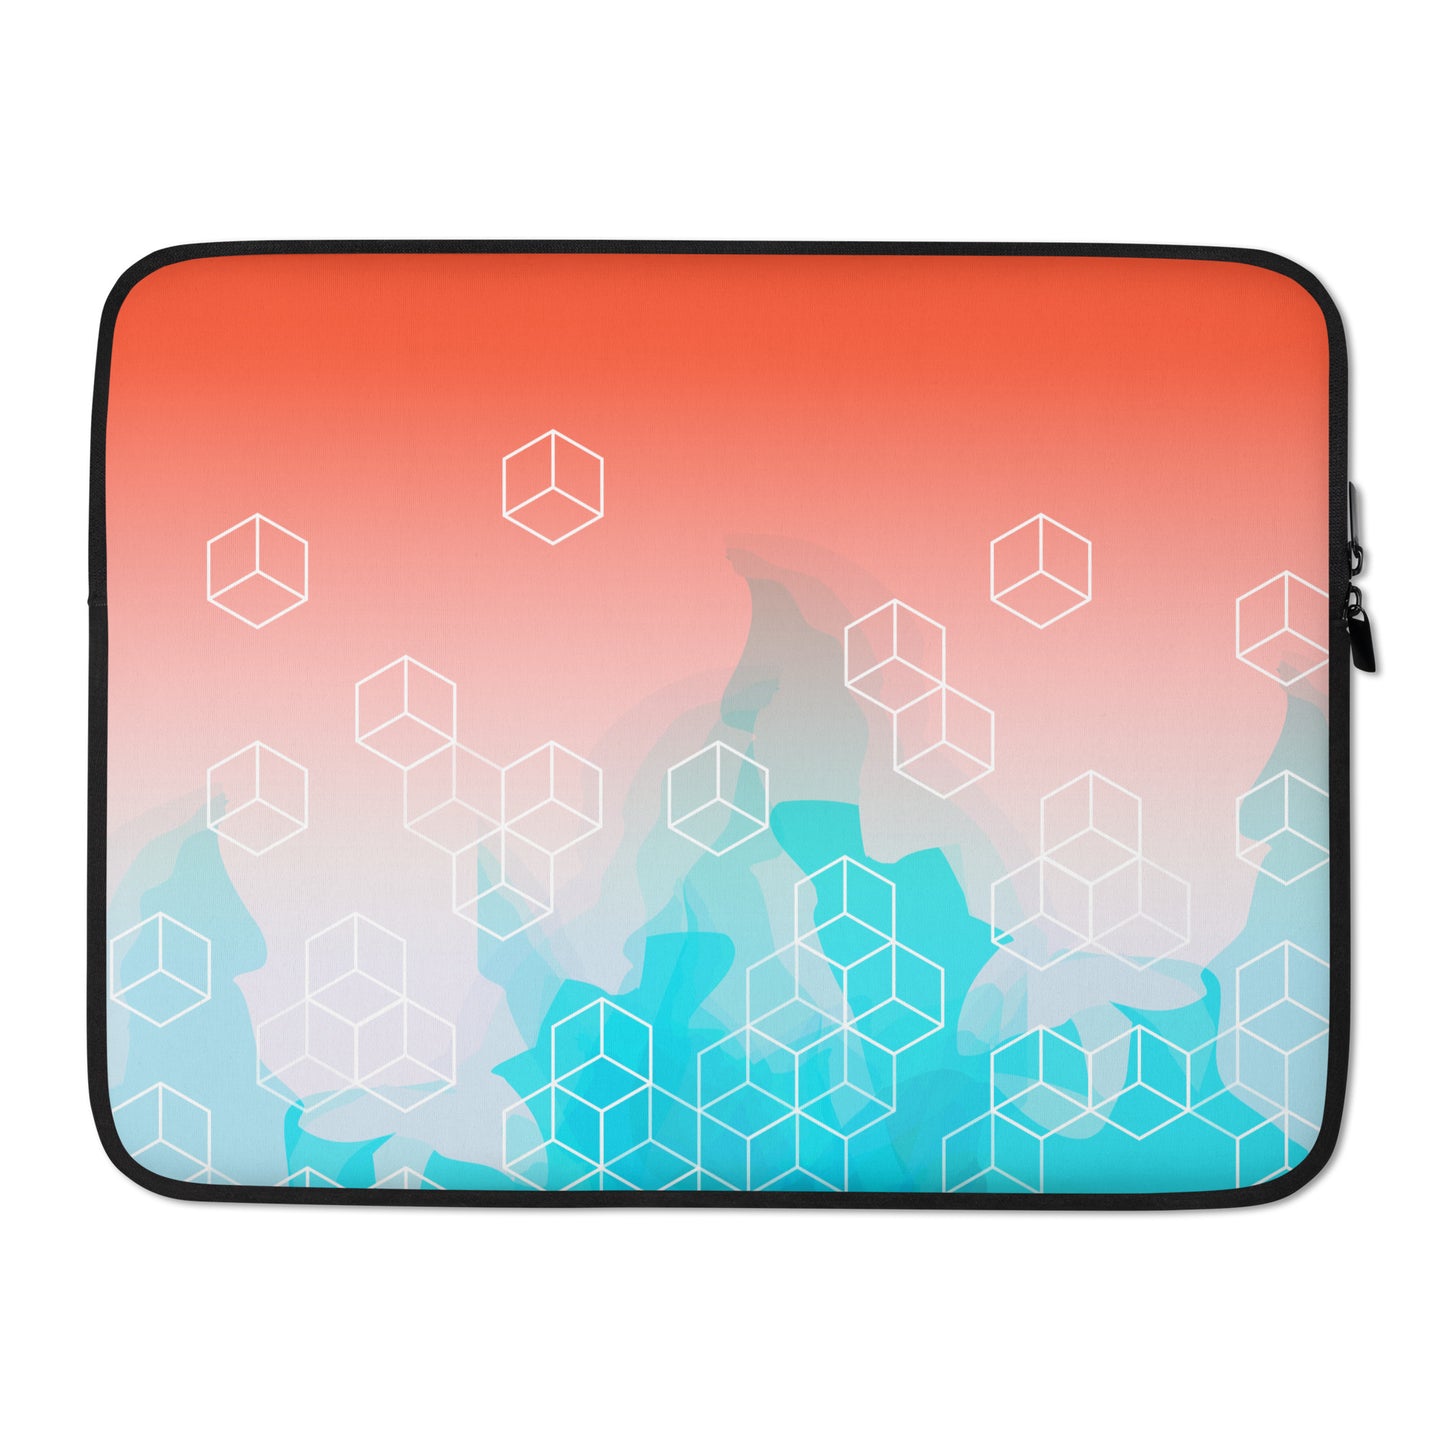 Bright Watercolor Cube Laptop Sleeve